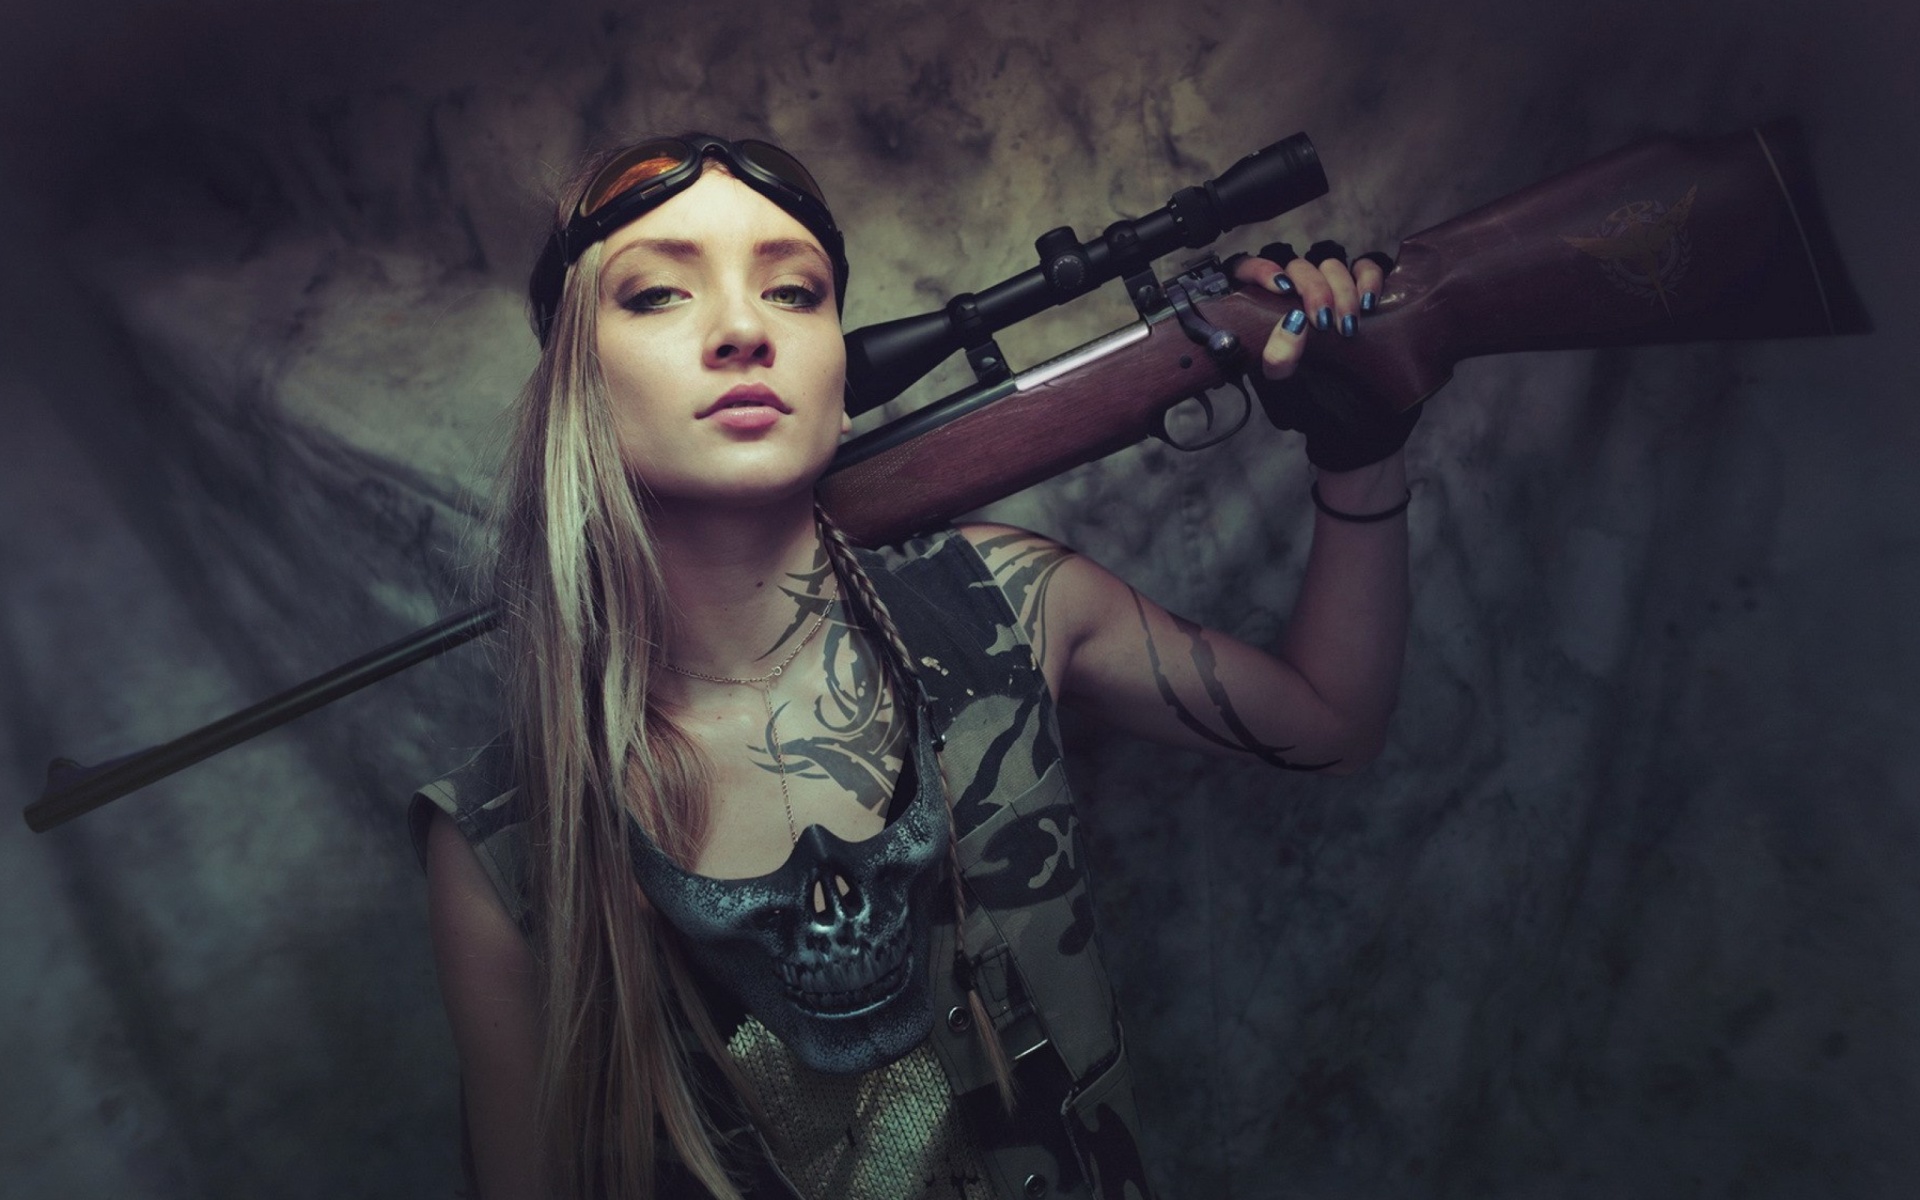 Soldier girl with a sniper rifle wallpaper 1920x1200